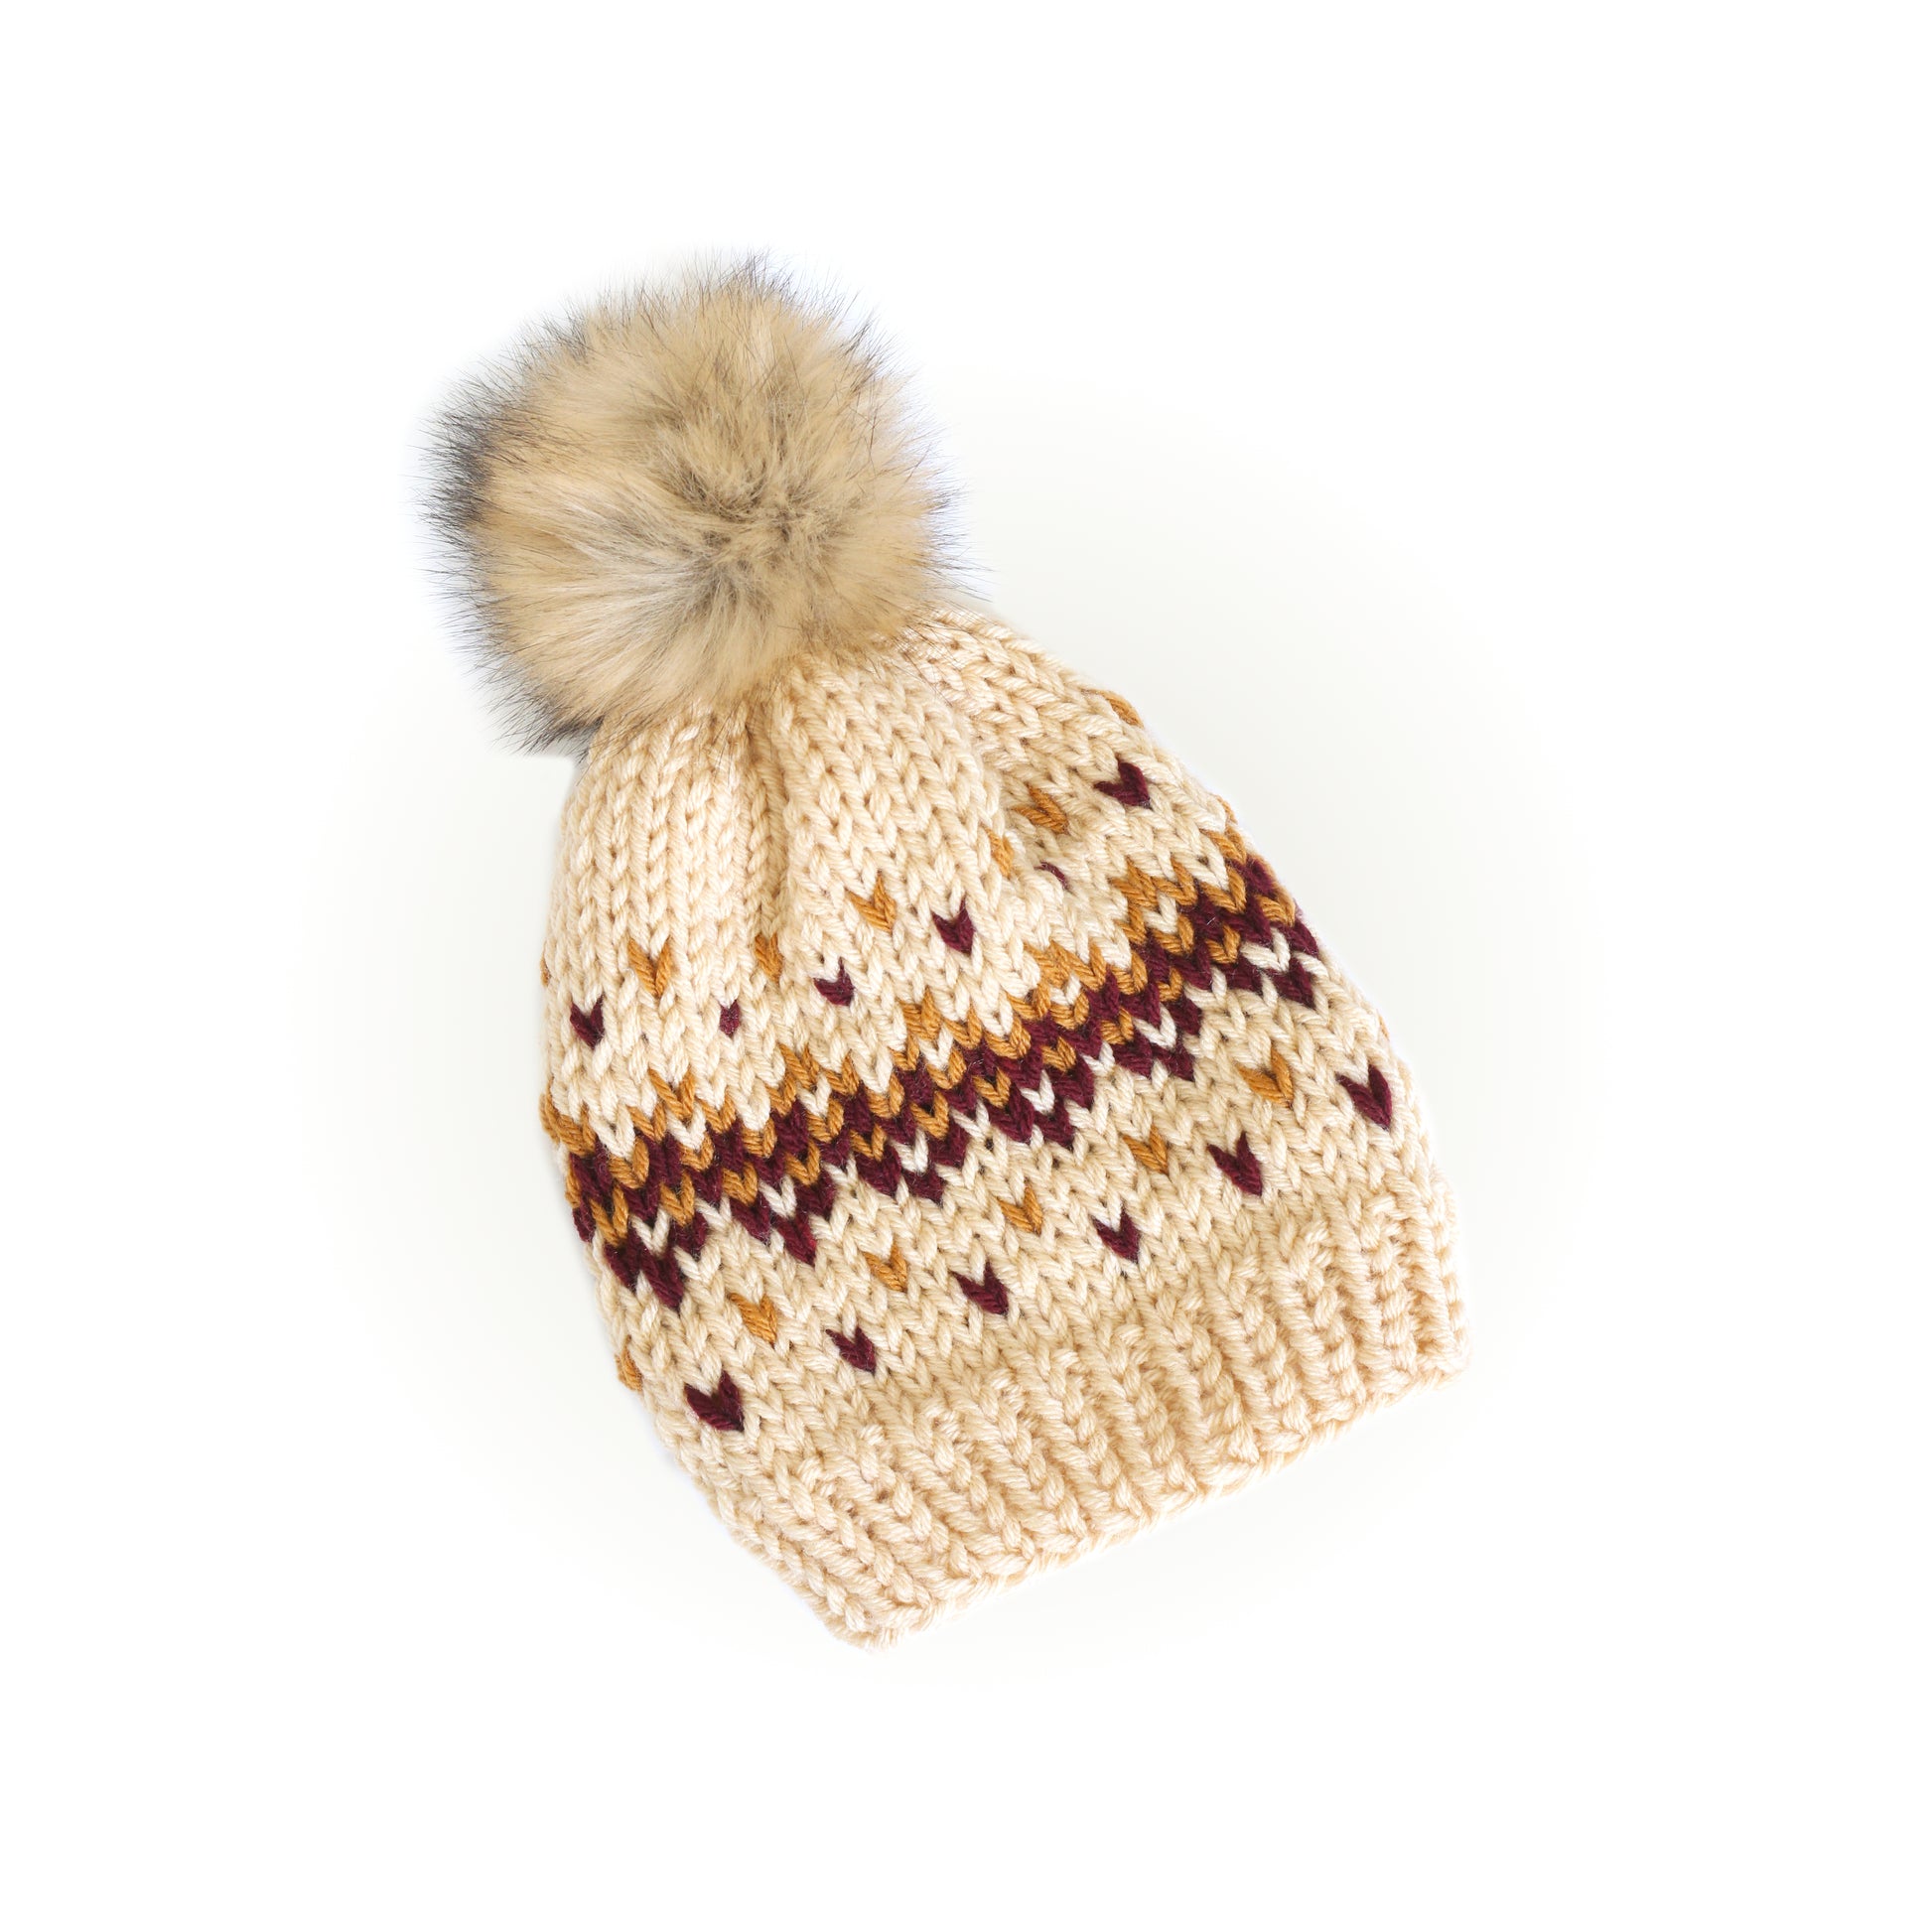 Knit Beanie Hat with Faux Fur Pom - Fair Isle Taupe Brown Hat